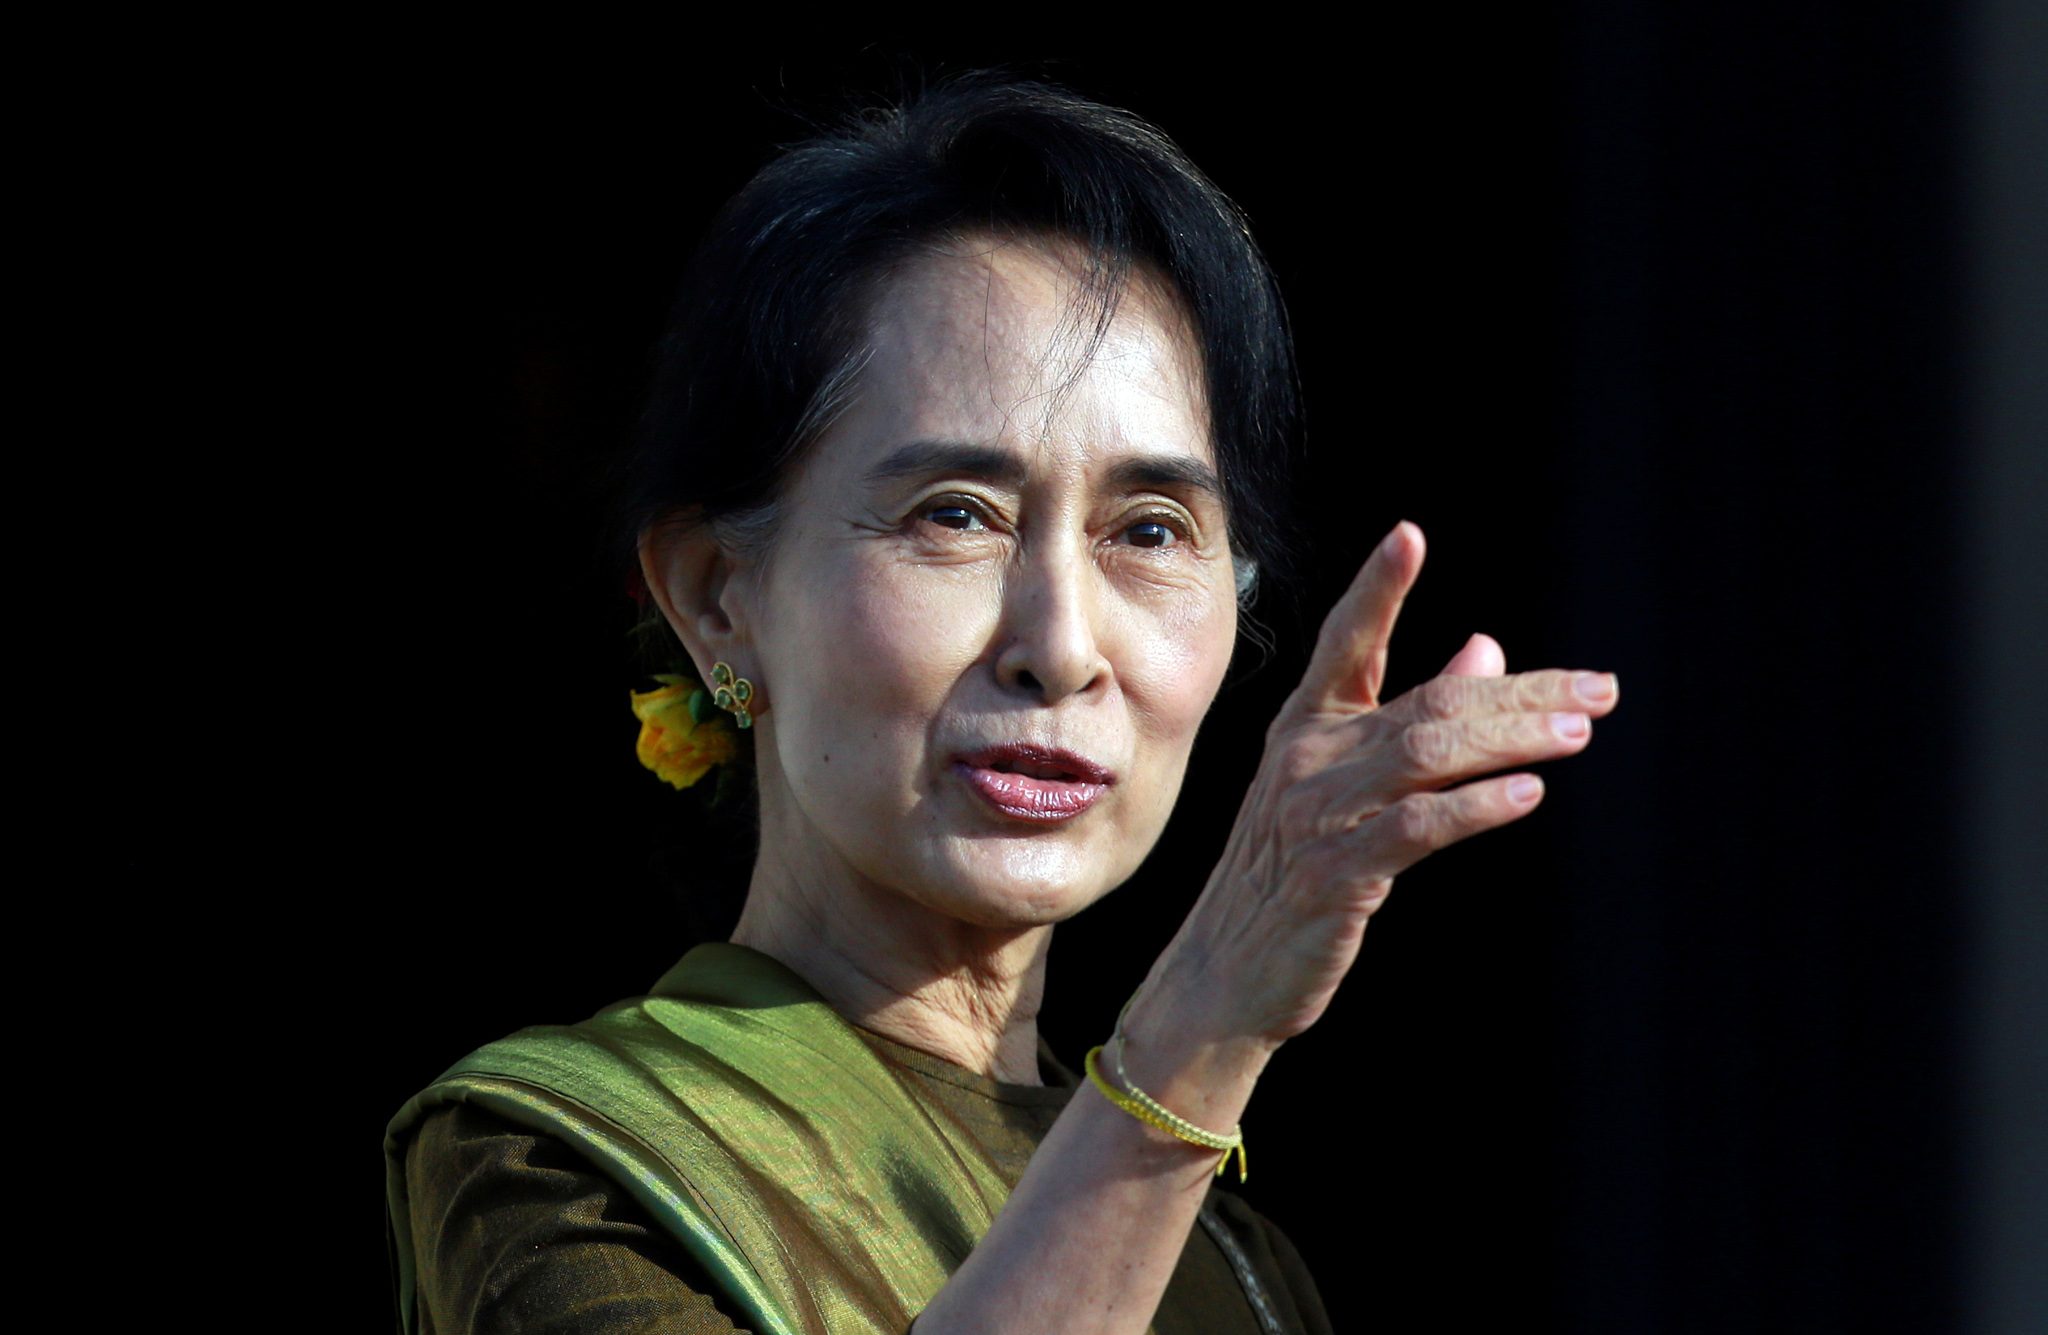 In rare comments, Myanmar’s Suu Kyi urges people to ‘be united’ – source